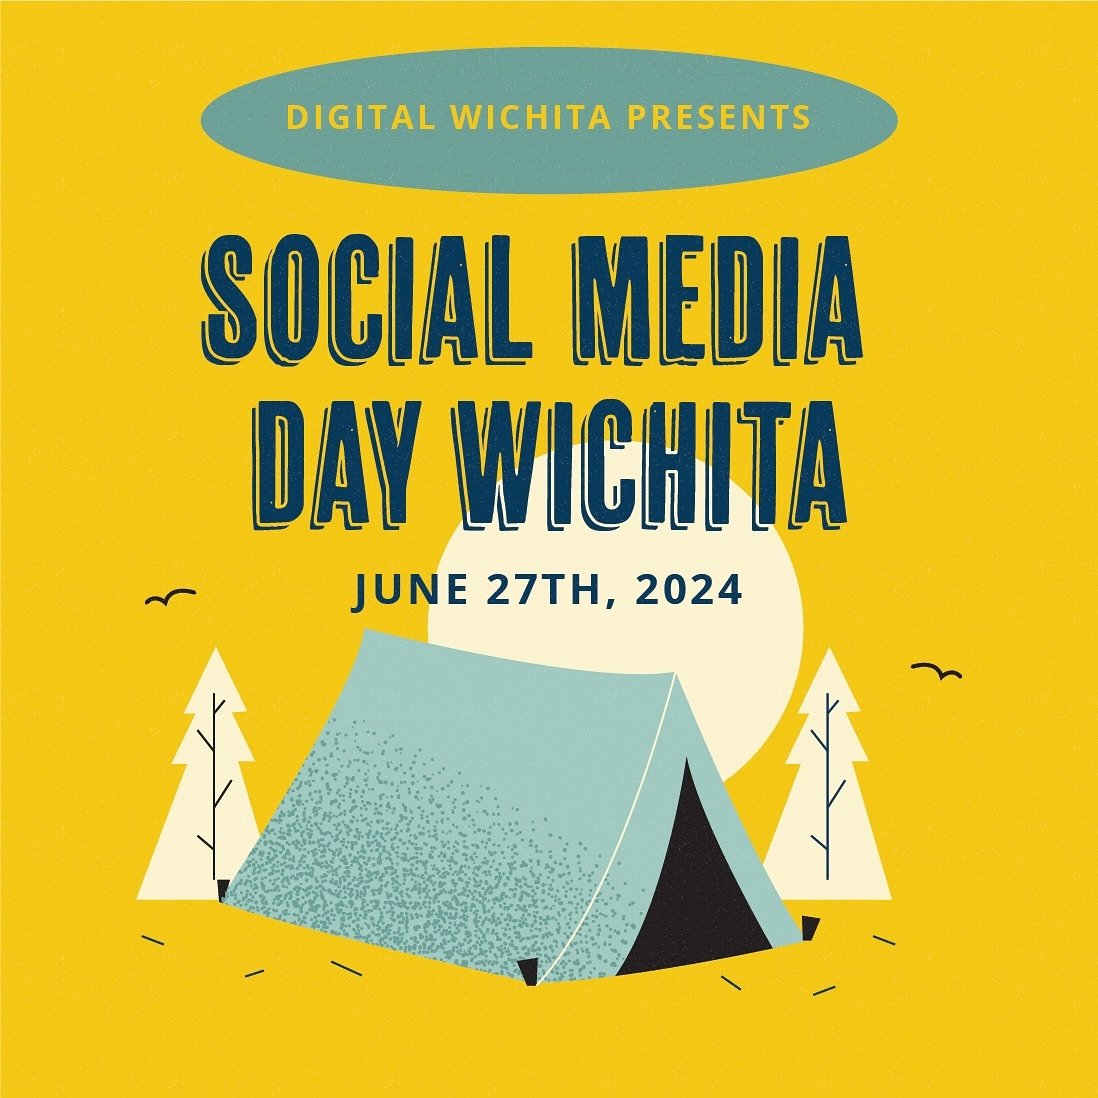 We are excited to announce that Kelsey is a Social Media Day Wichita speaker! Contrary to expectations, her focus will be on something other than social media; instead, Kelsey will explore the world of PODCASTING. Join her on Thursday, June 27, at So